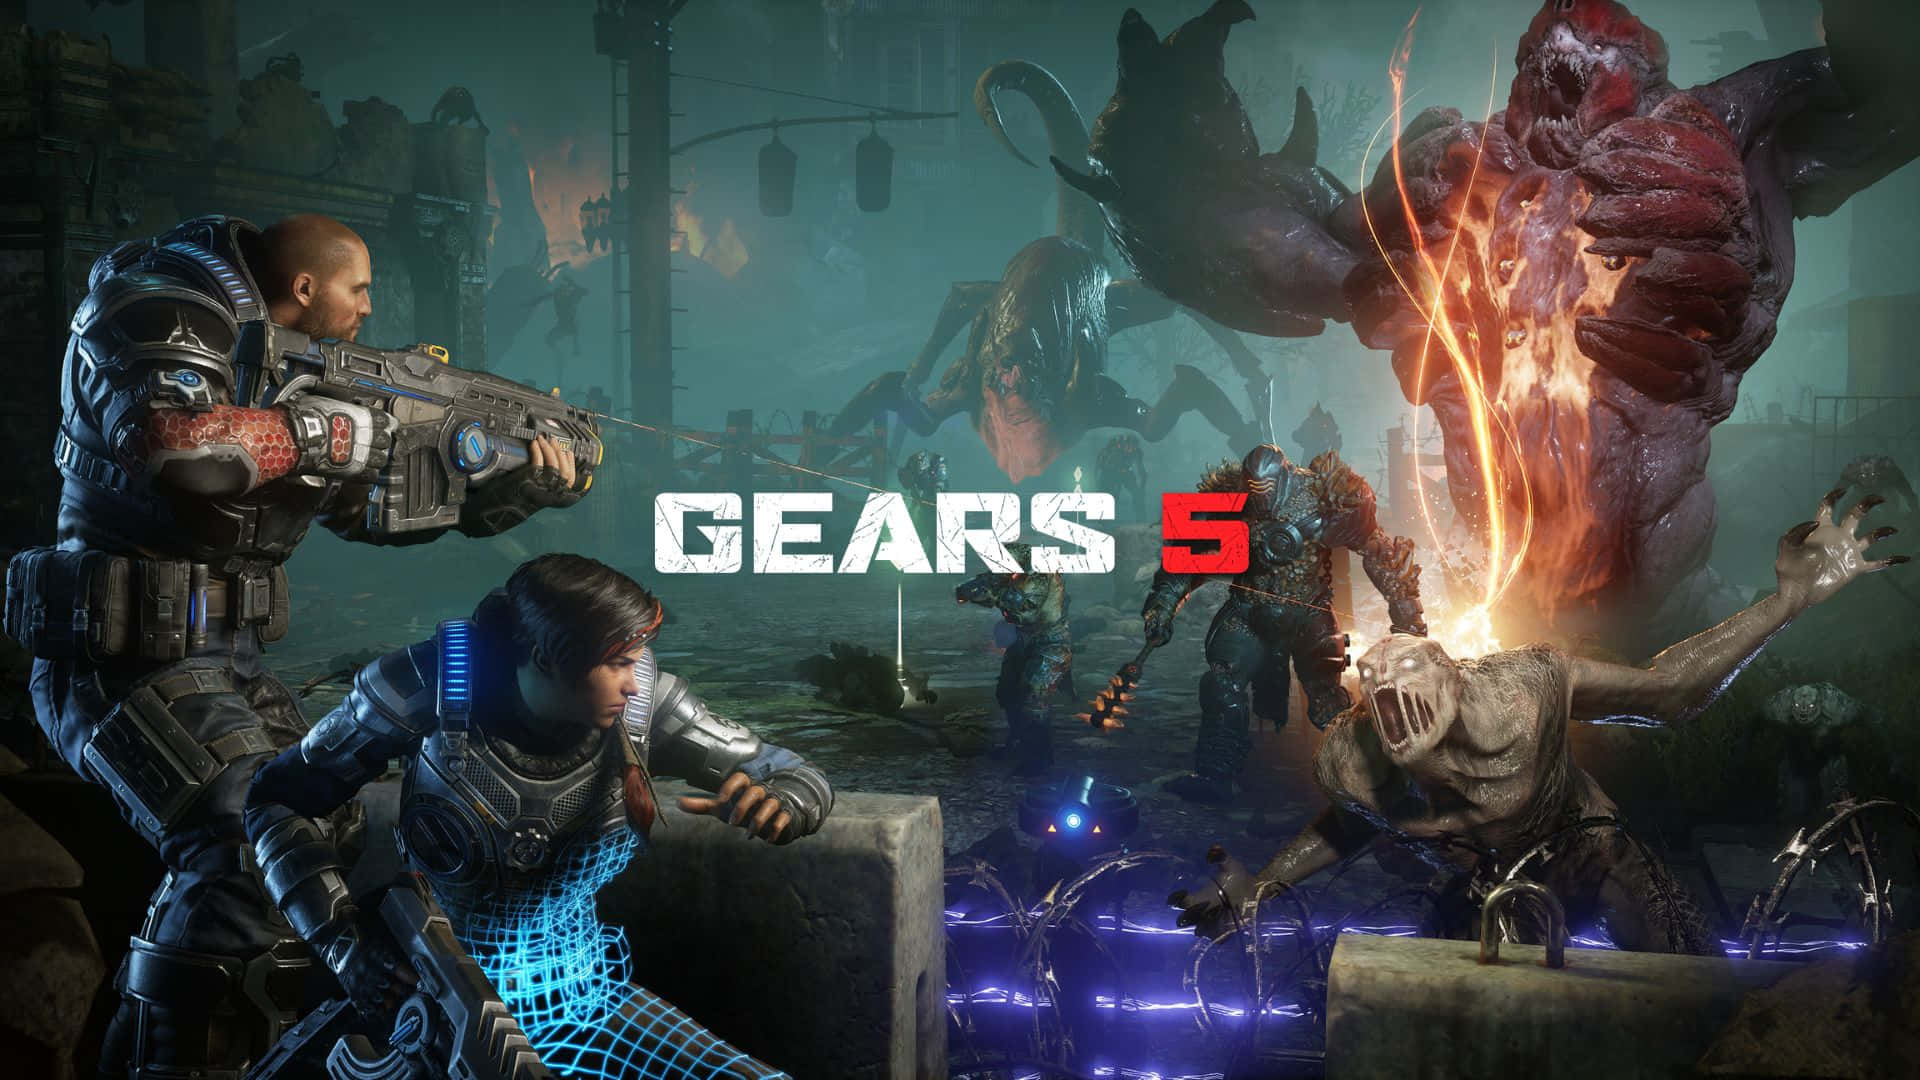 Captivating graphics in the most thrilling Gears of War 5 experience.